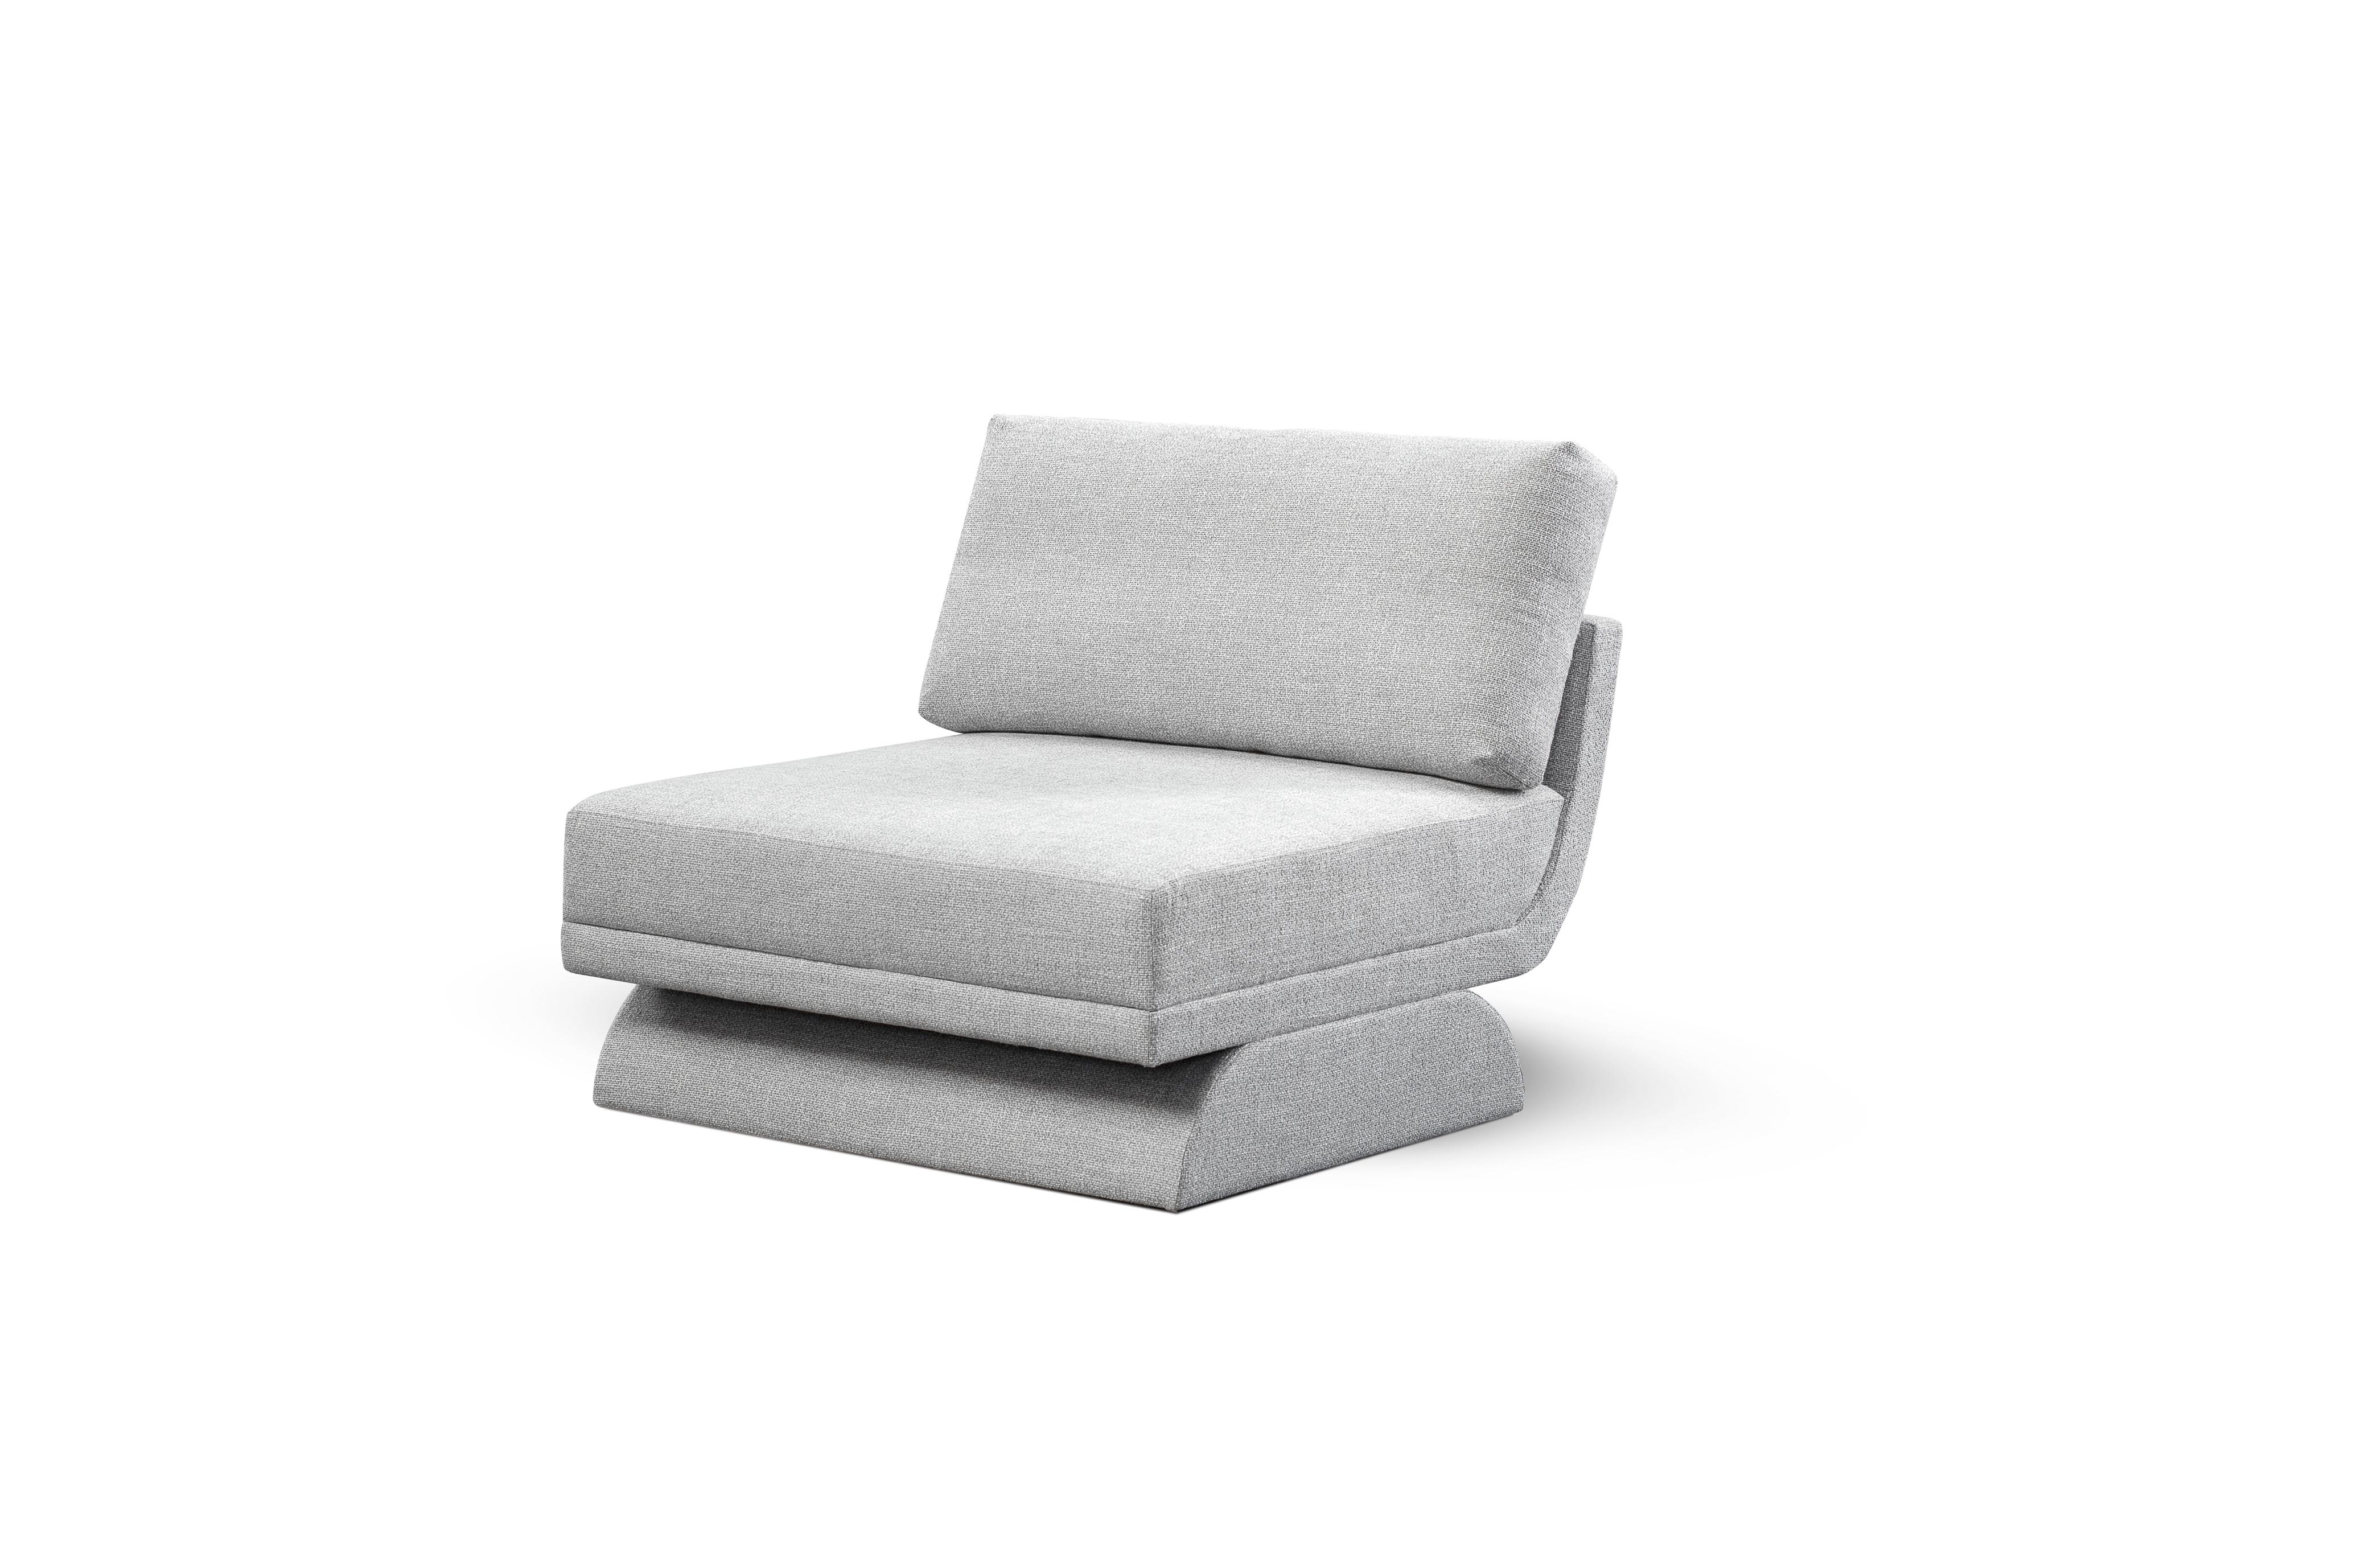 Oscar Middle Modular Sofa by DUISTT 
Dimensions: W 95 x D 105 x H 84 cm
Materials: Duistt Fabric

Inspired by the curved lines poetry of Oscar Niemeyer’s architecture, OSCAR modular sofa allures for its sensual and free-flowing curves. Like Niemeyer